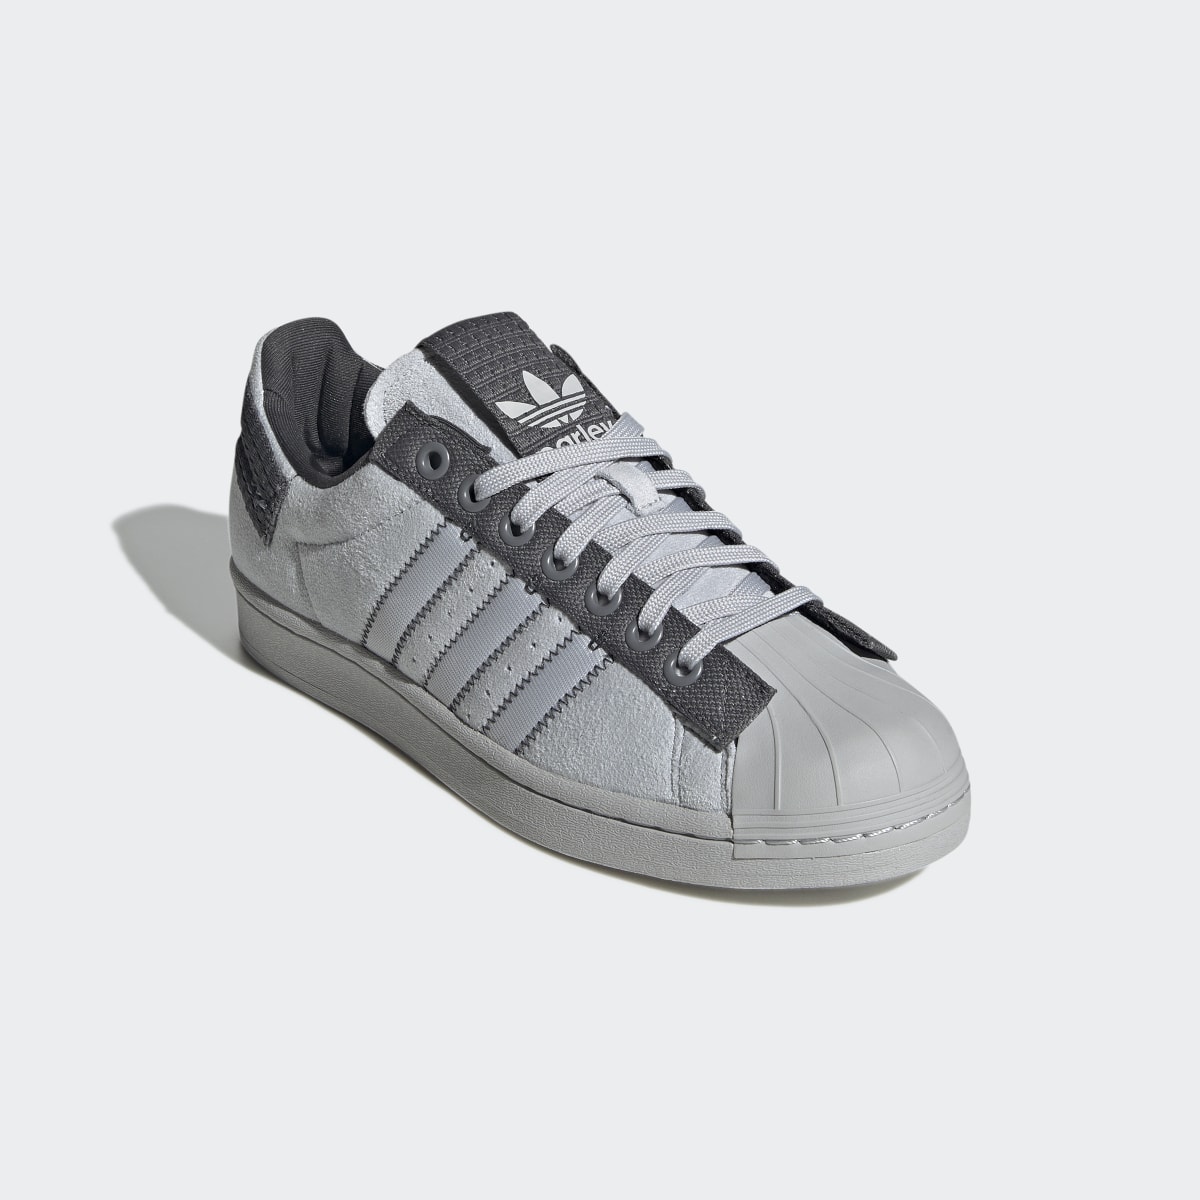 Adidas Superstar Parley Shoes. 8